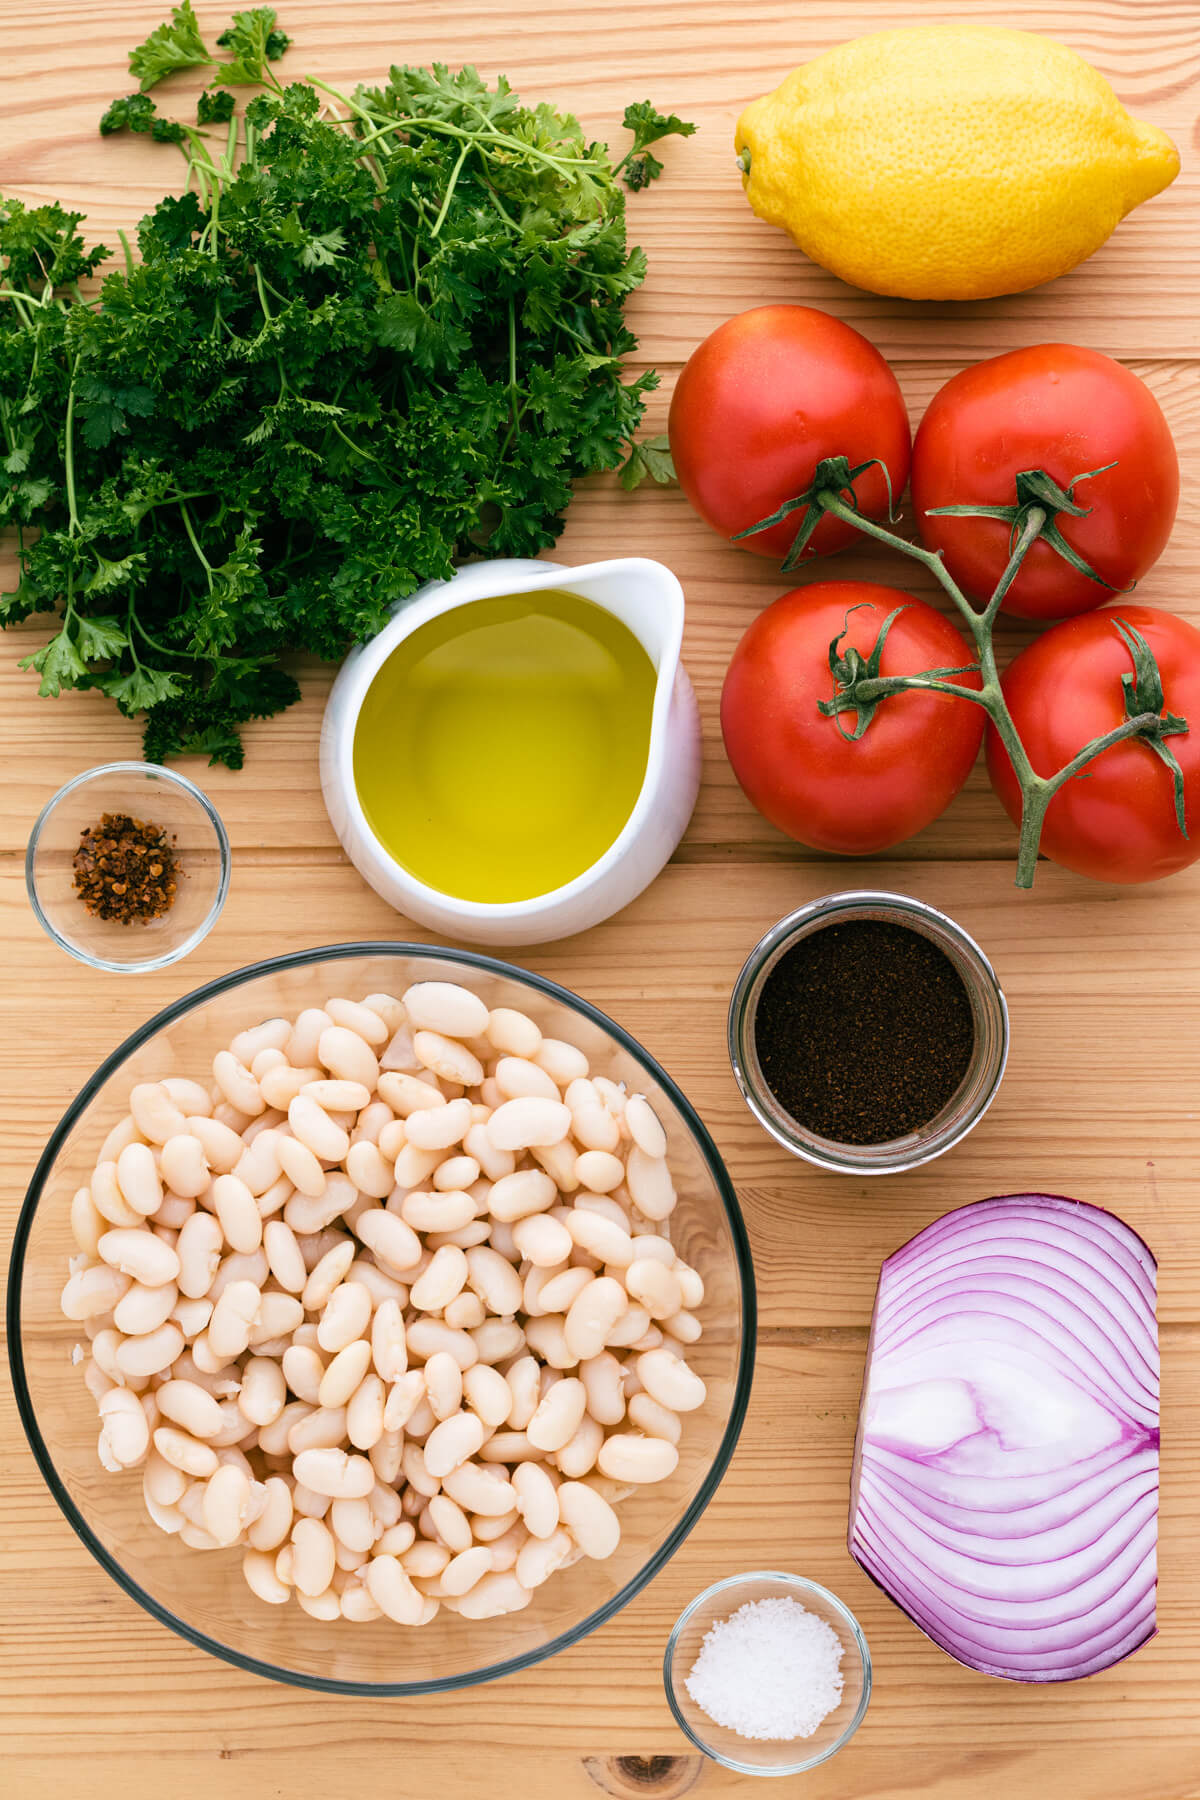 Ingredients for Piyaz; a white bean salad with tomatoes, red onion, and curly parsley.